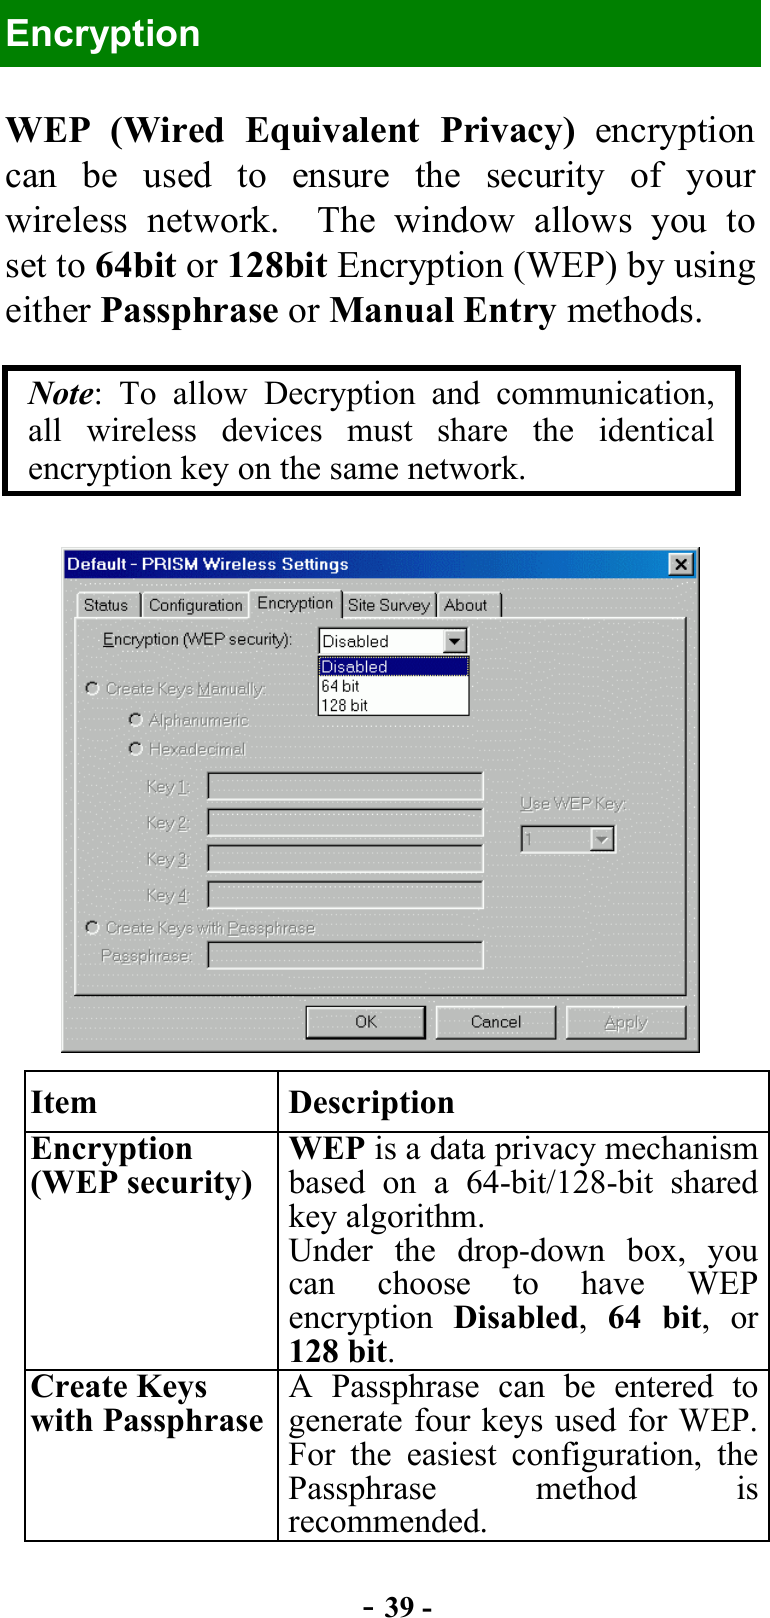  - 39 - Encryption WEP (Wired Equivalent Privacy) encryption can be used to ensure the security of your wireless network.  The window allows you to set to 64bit or 128bit Encryption (WEP) by using either Passphrase or Manual Entry methods.     Note: To allow Decryption and communication, all wireless devices must share the identical encryption key on the same network.  Item Description Encryption (WEP security)WEP is a data privacy mechanism based on a 64-bit/128-bit shared key algorithm. Under the drop-down box, you can choose to have WEP encryption  Disabled,  64 bit, or 128 bit. Create Keys with Passphrase A Passphrase can be entered to generate four keys used for WEP. For the easiest configuration, the Passphrase method is recommended. 